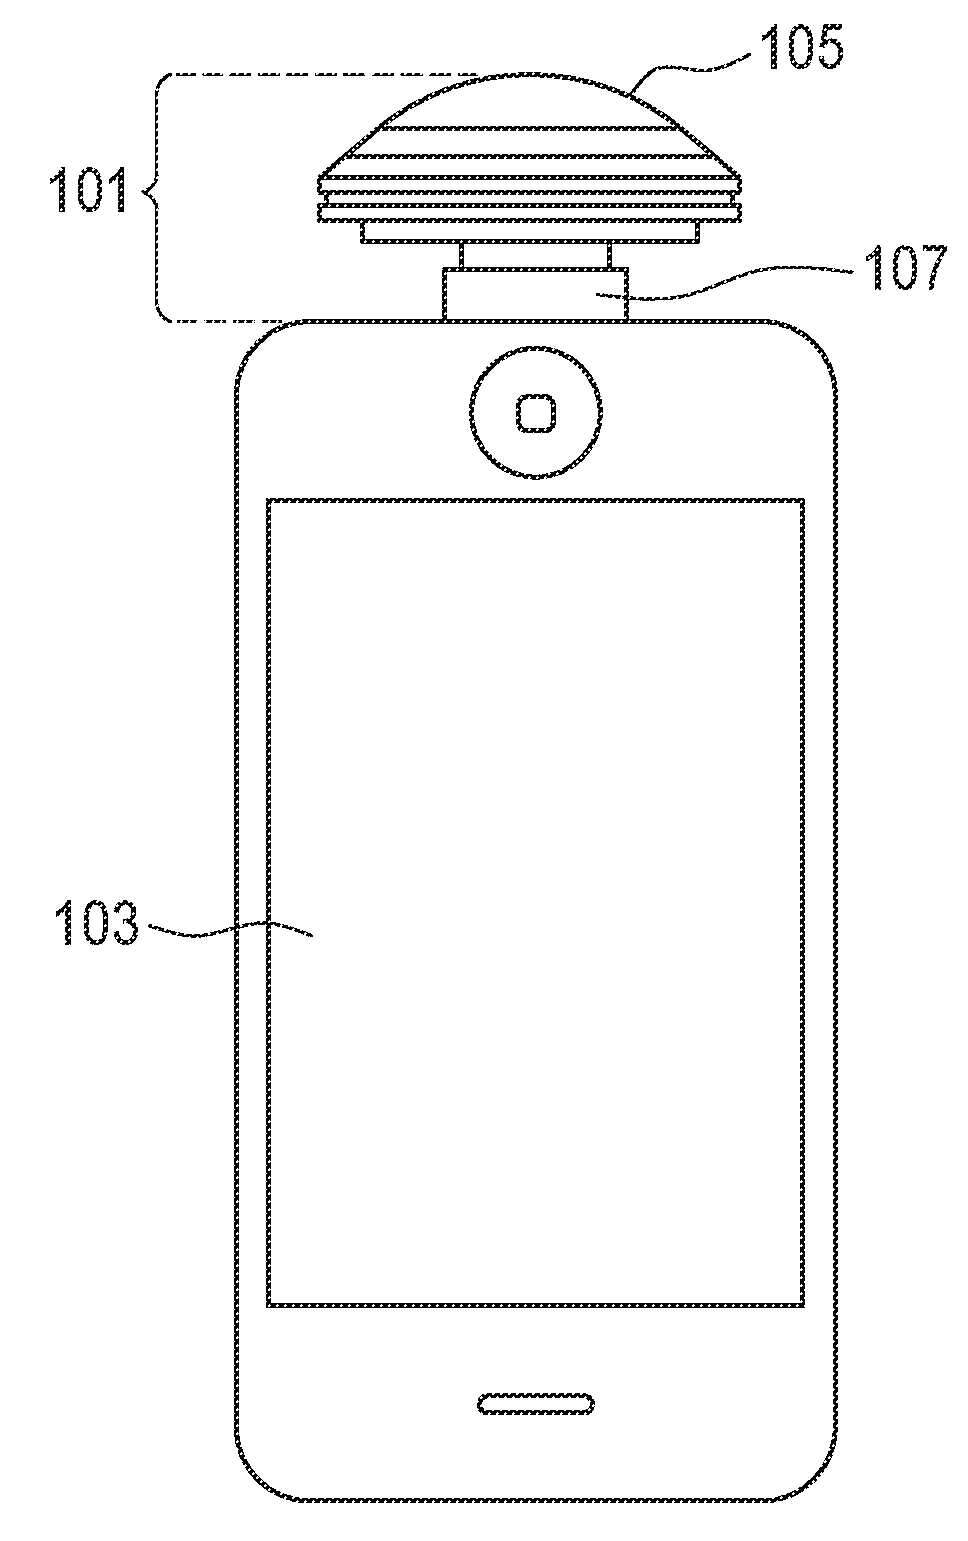 Mobile Device-Mountable Panoramic Camera System and Method of Displaying Images Captured Therefrom